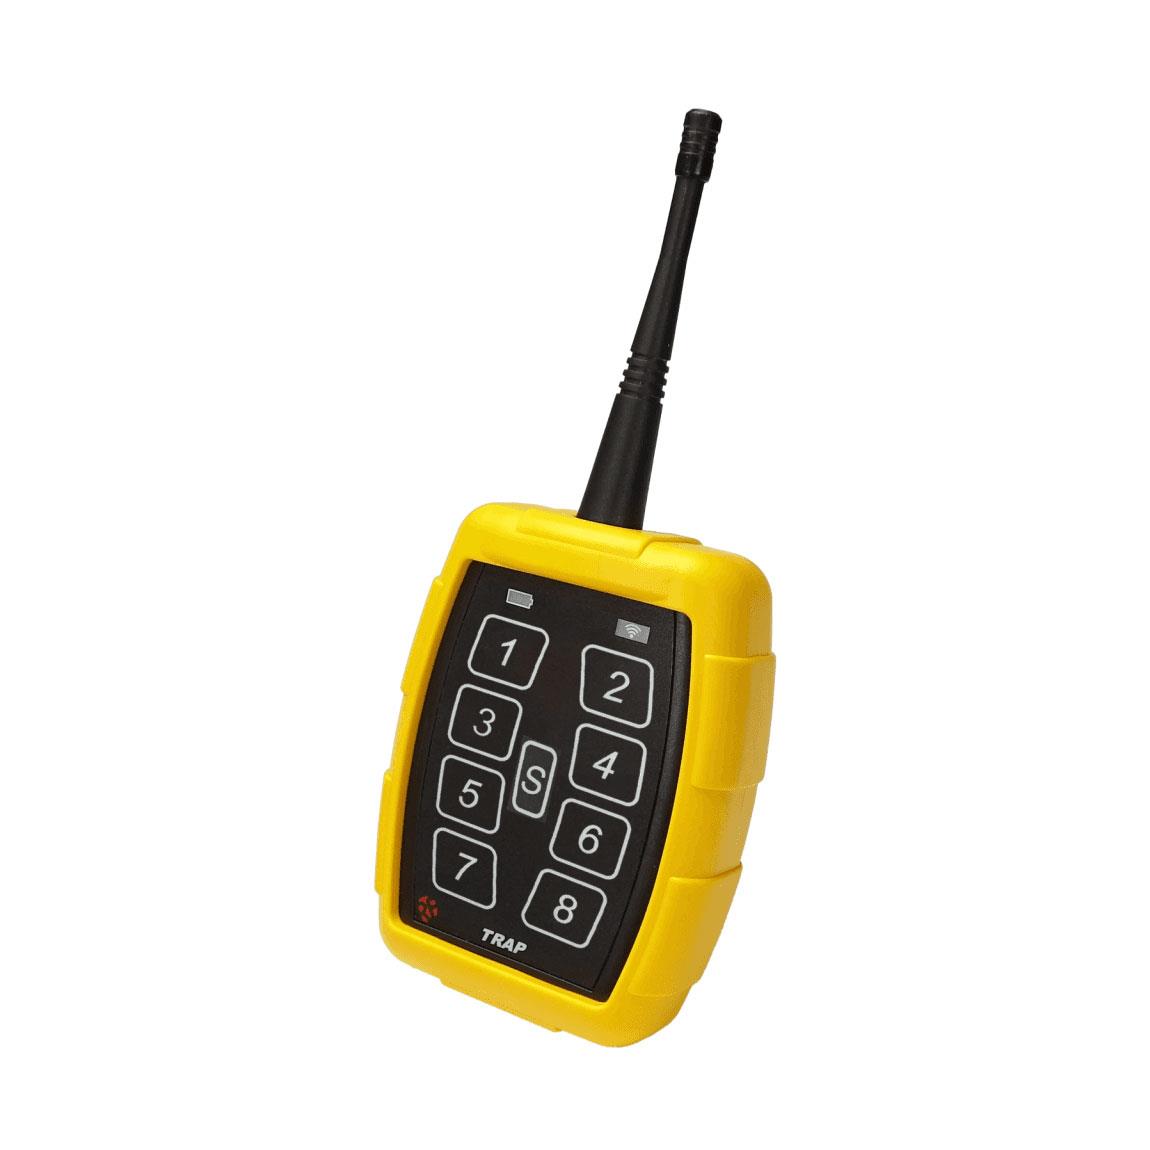 【TRAP-9T16】HAND HELD TRANSMITTER 4 SW 918MH